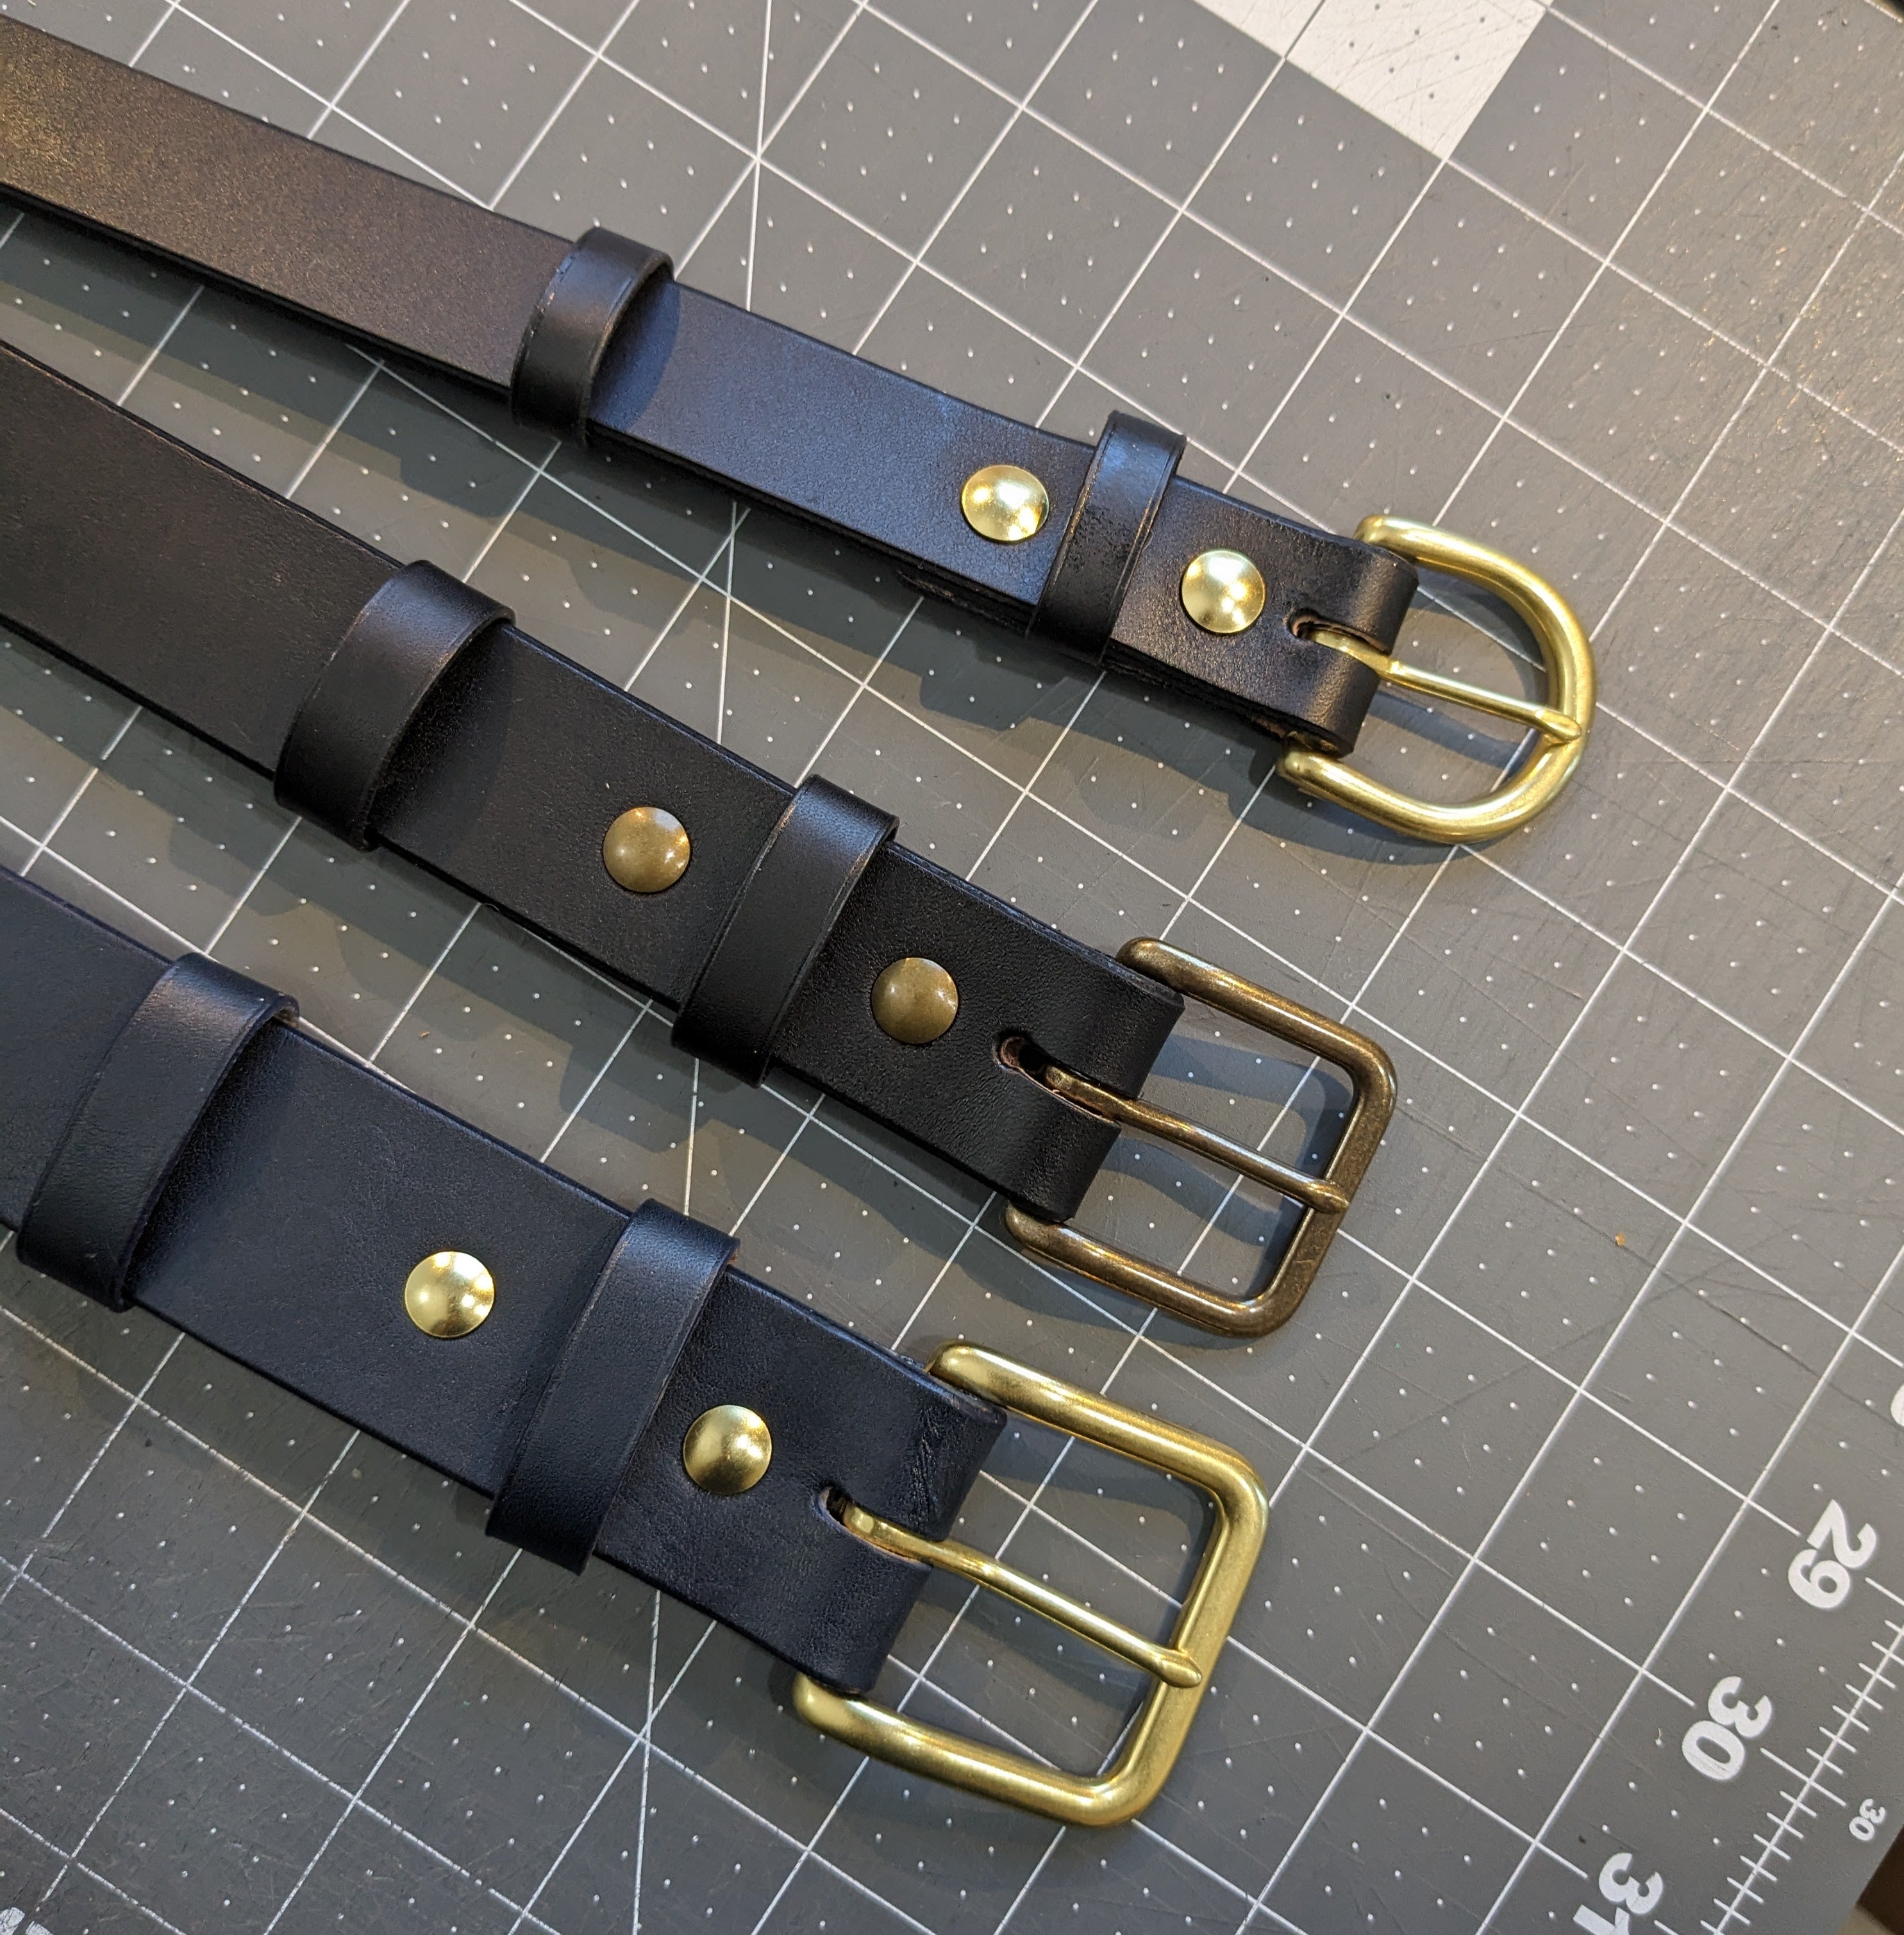 3 Handcrafted Black Leather Belts with various width and types of brass buckles.